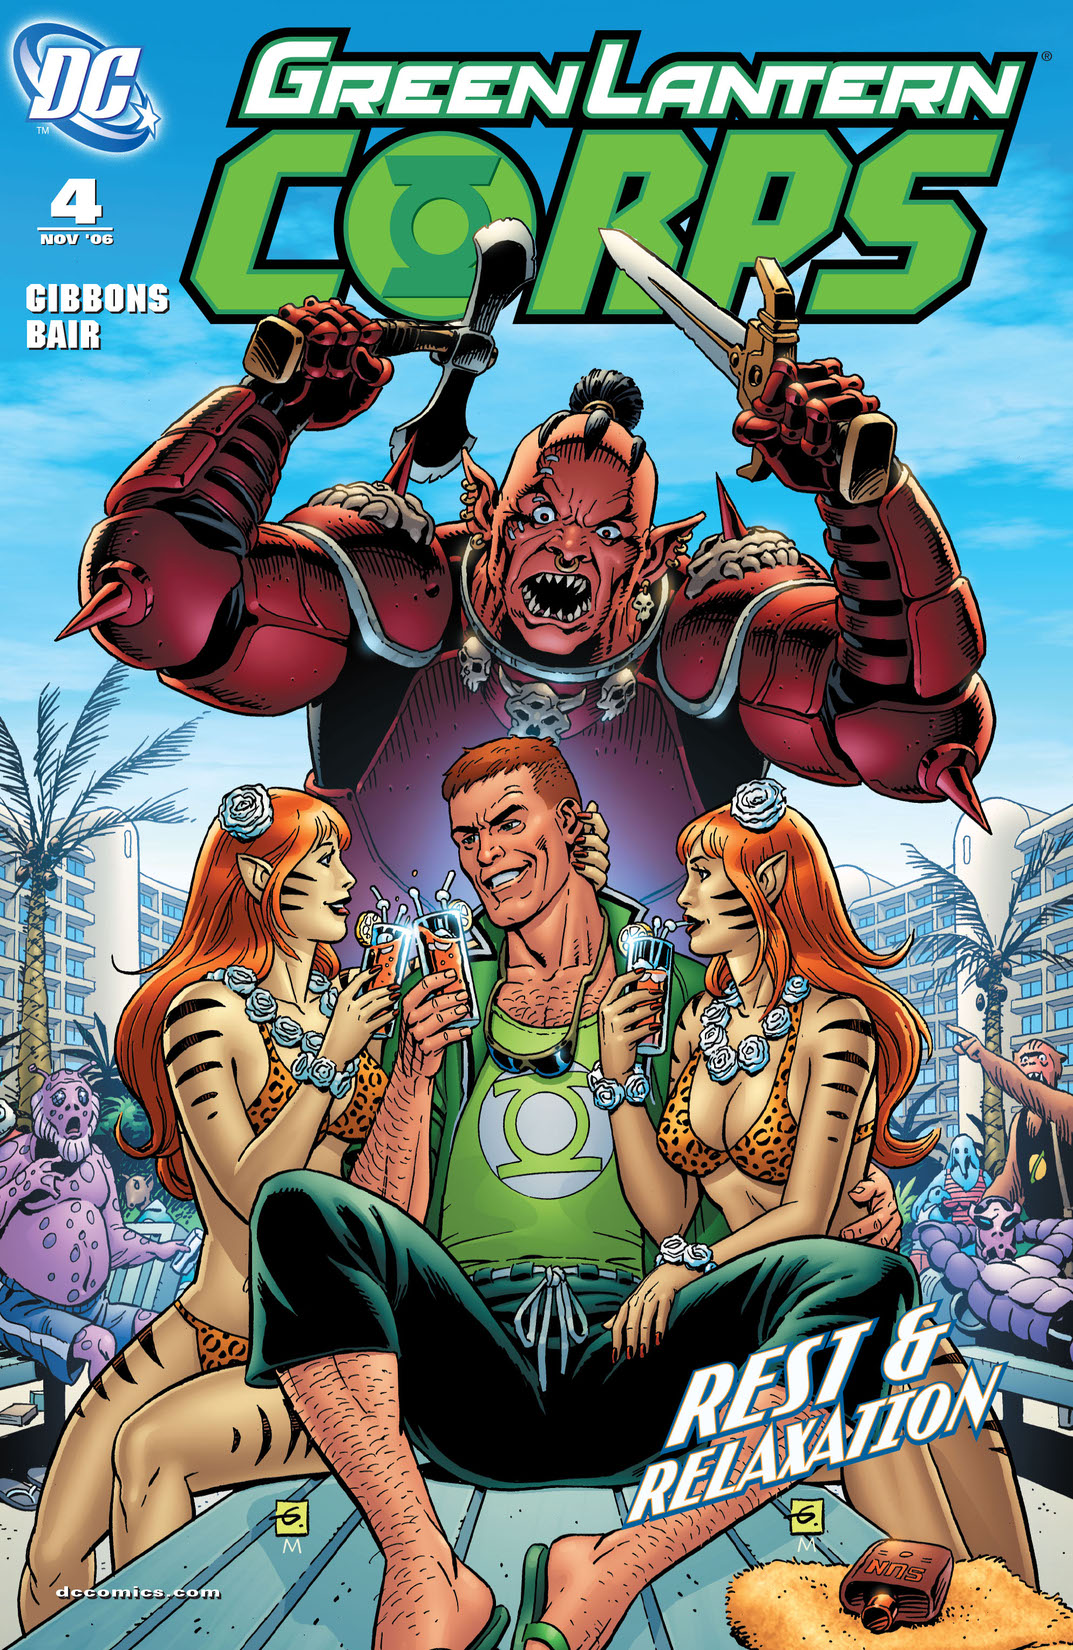 Green Lantern Corps (2006-) #4 preview images